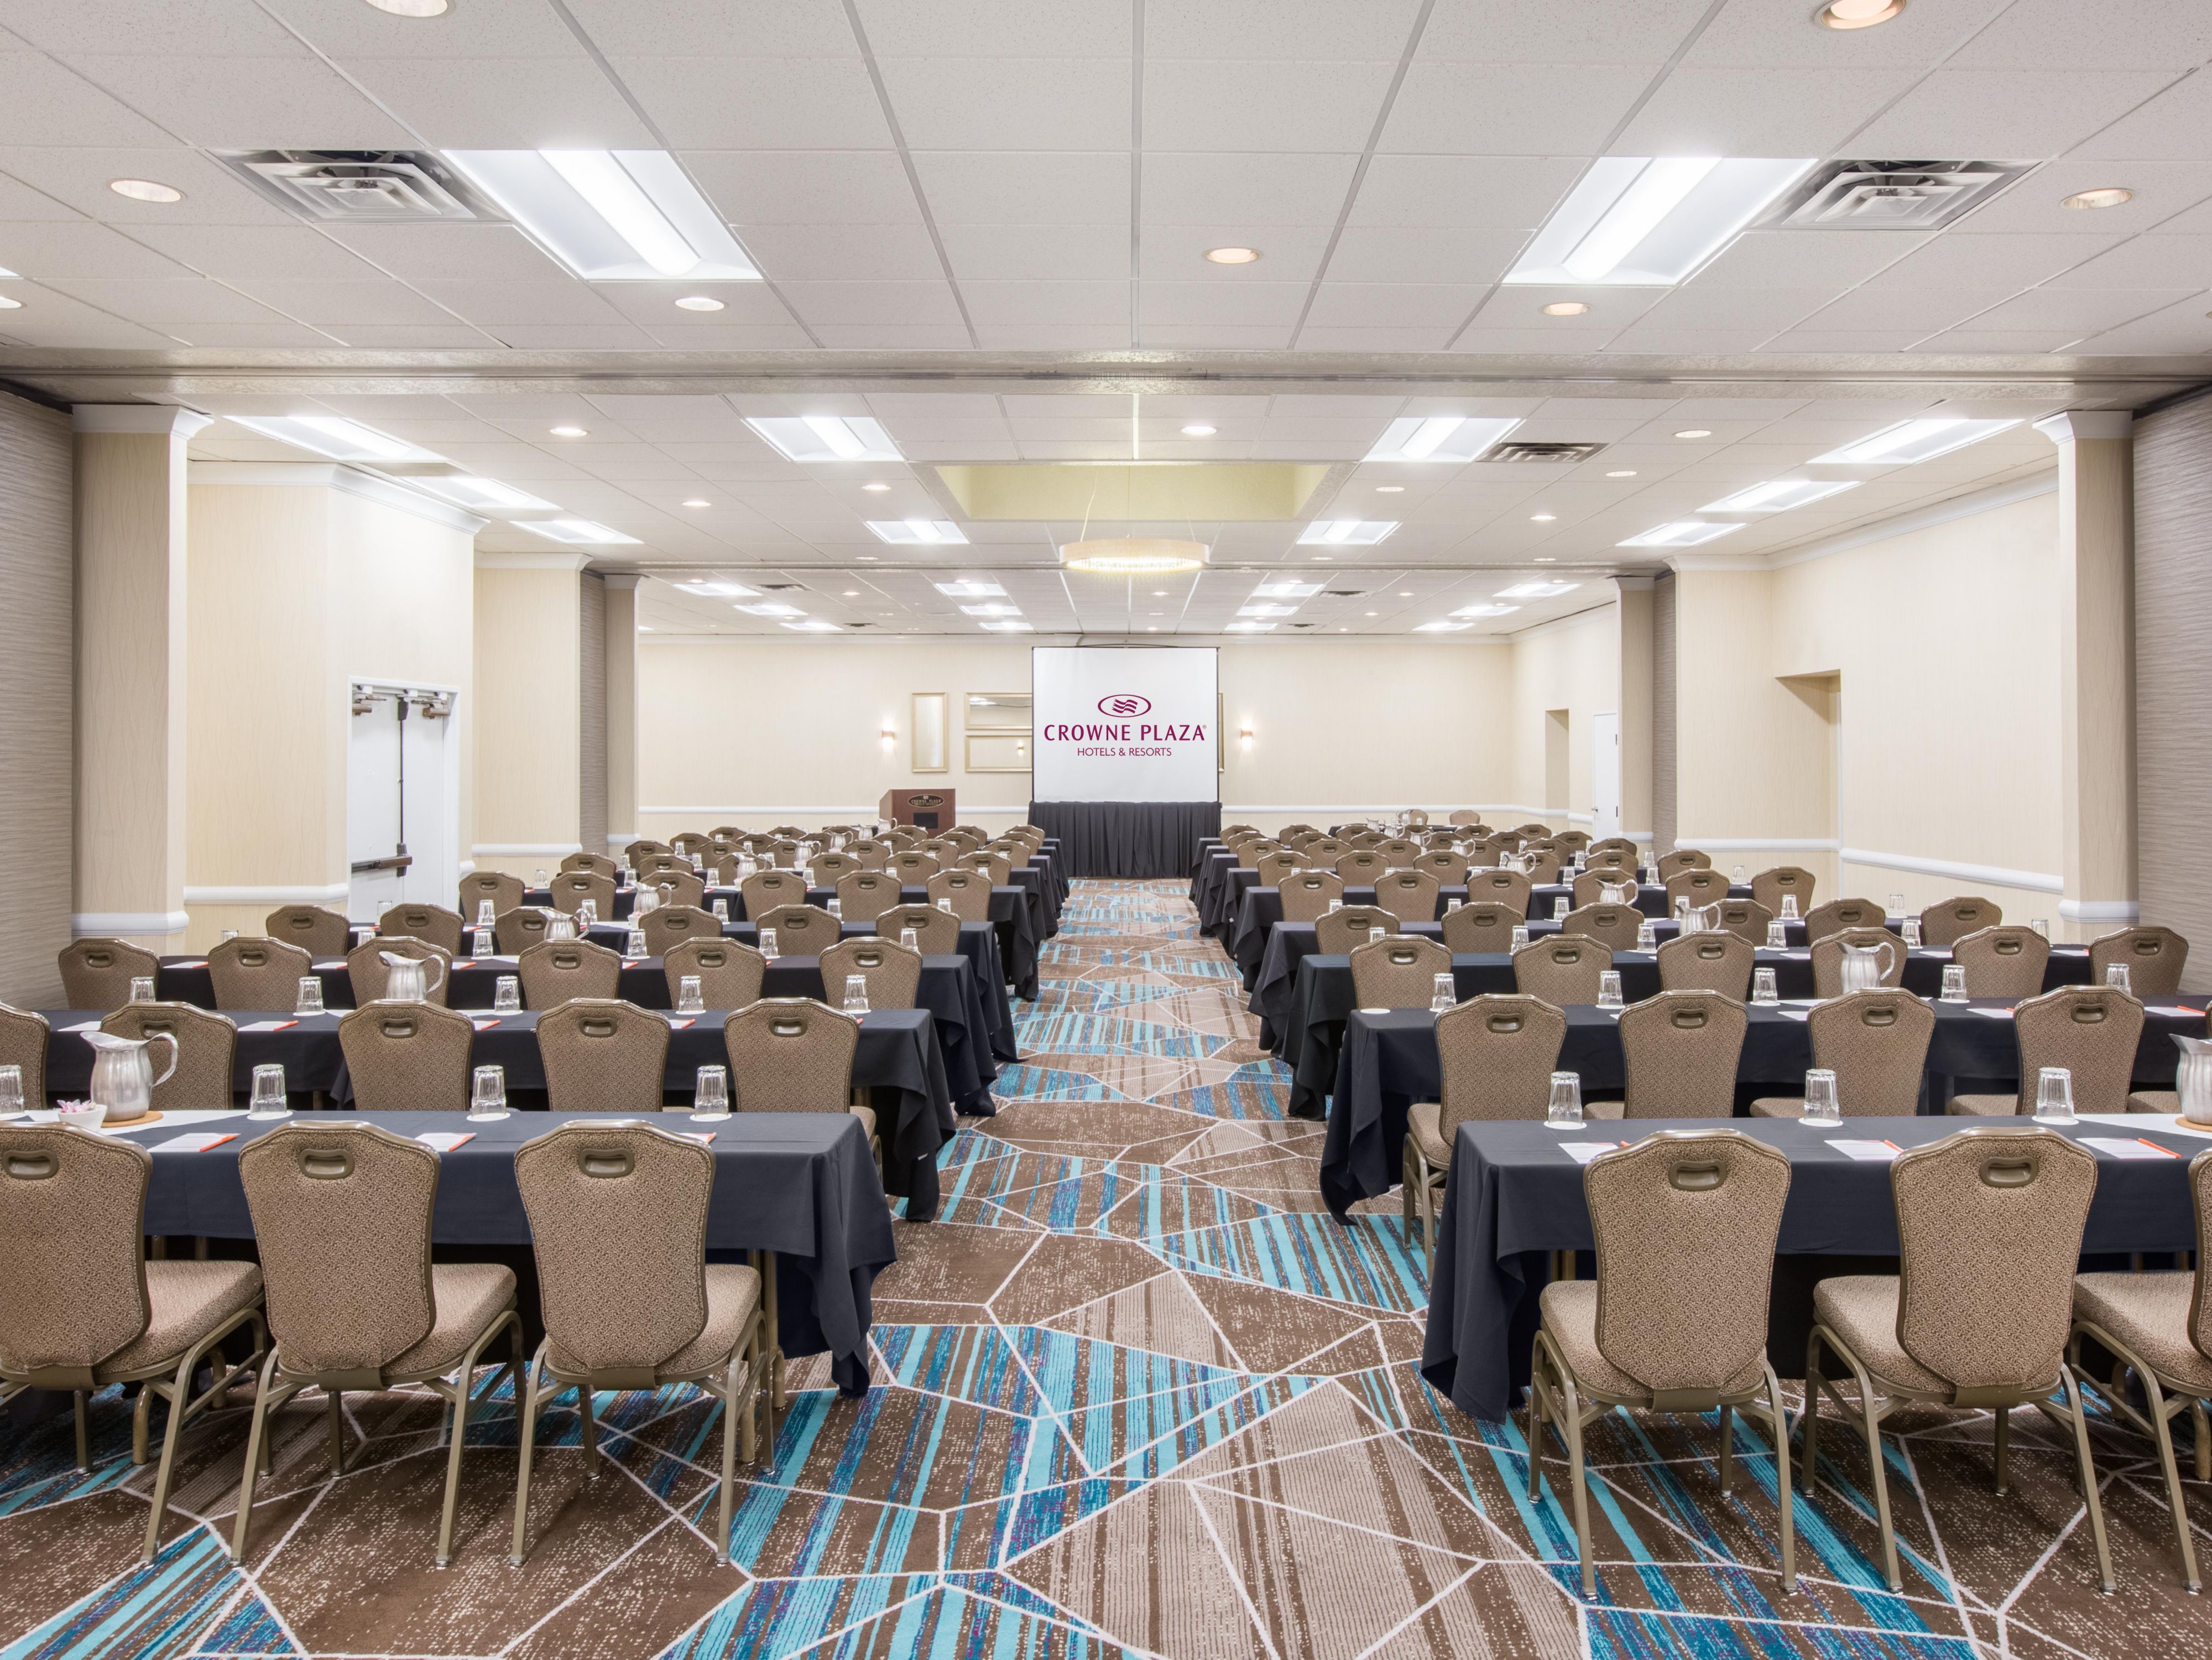 Schedule your next big occasion at our events venue, featuring over 5,000 square feet of flexible meeting space. Host a wedding celebration in the Plaza Ballroom or gather colleagues for a business meeting. Our hotel also offers on-site catering, high-speed Wi-Fi, and AV technology for your convenience.​